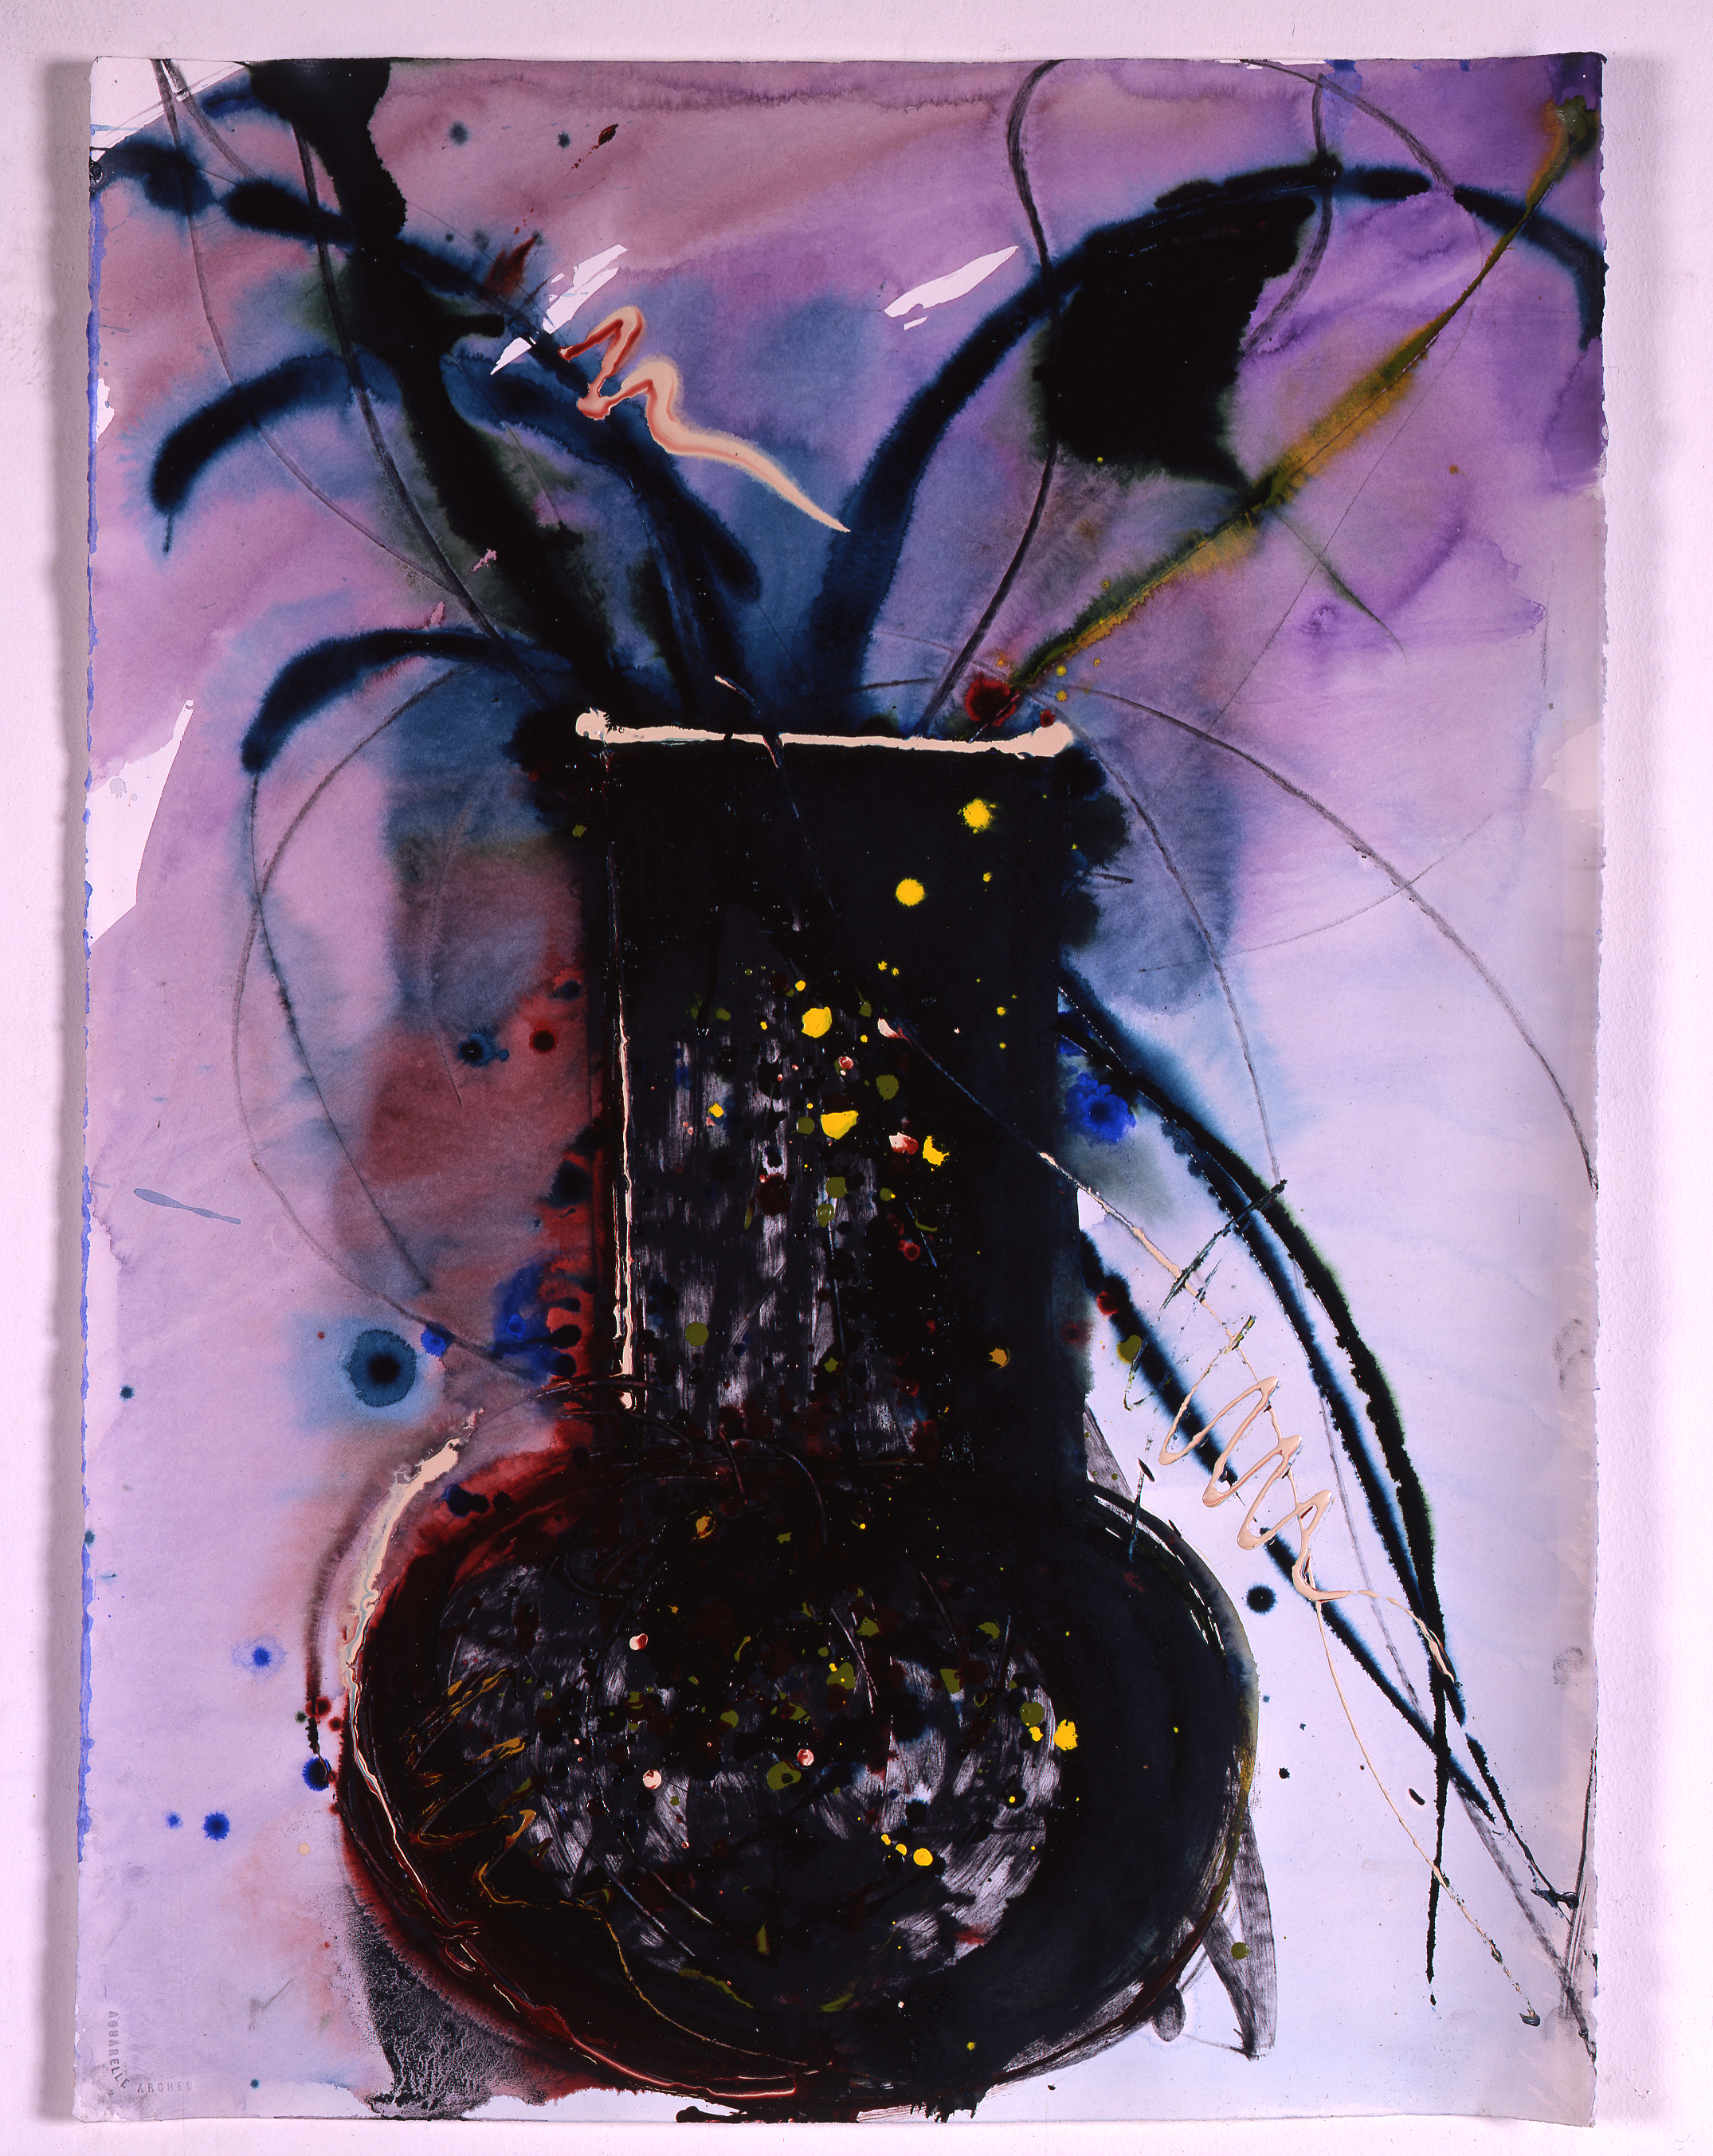  Dale Chihuly,&nbsp; Venetian Drawing (NY Lino Blow),&nbsp; (1992, mixed media&nbsp;on paper, 30 x 22 inches), DC.377 